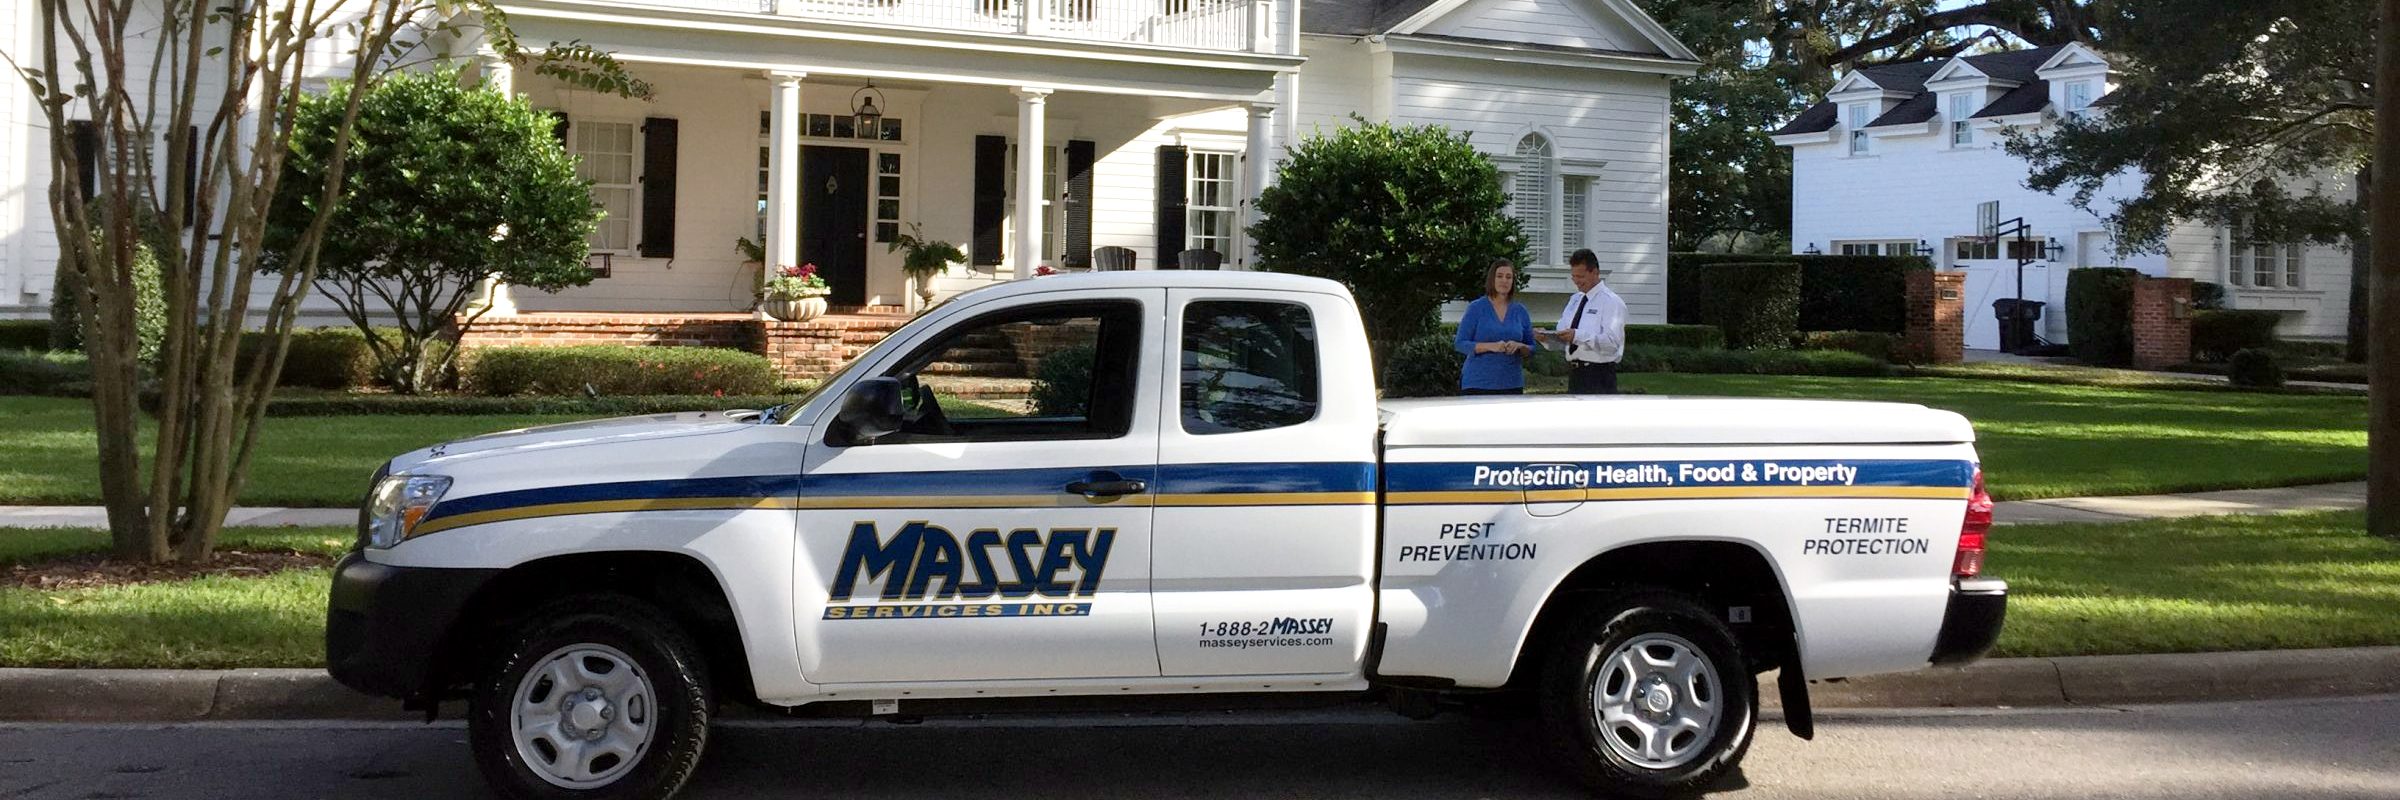 Massey Services - Pest Prevention, Termite Inspections ...